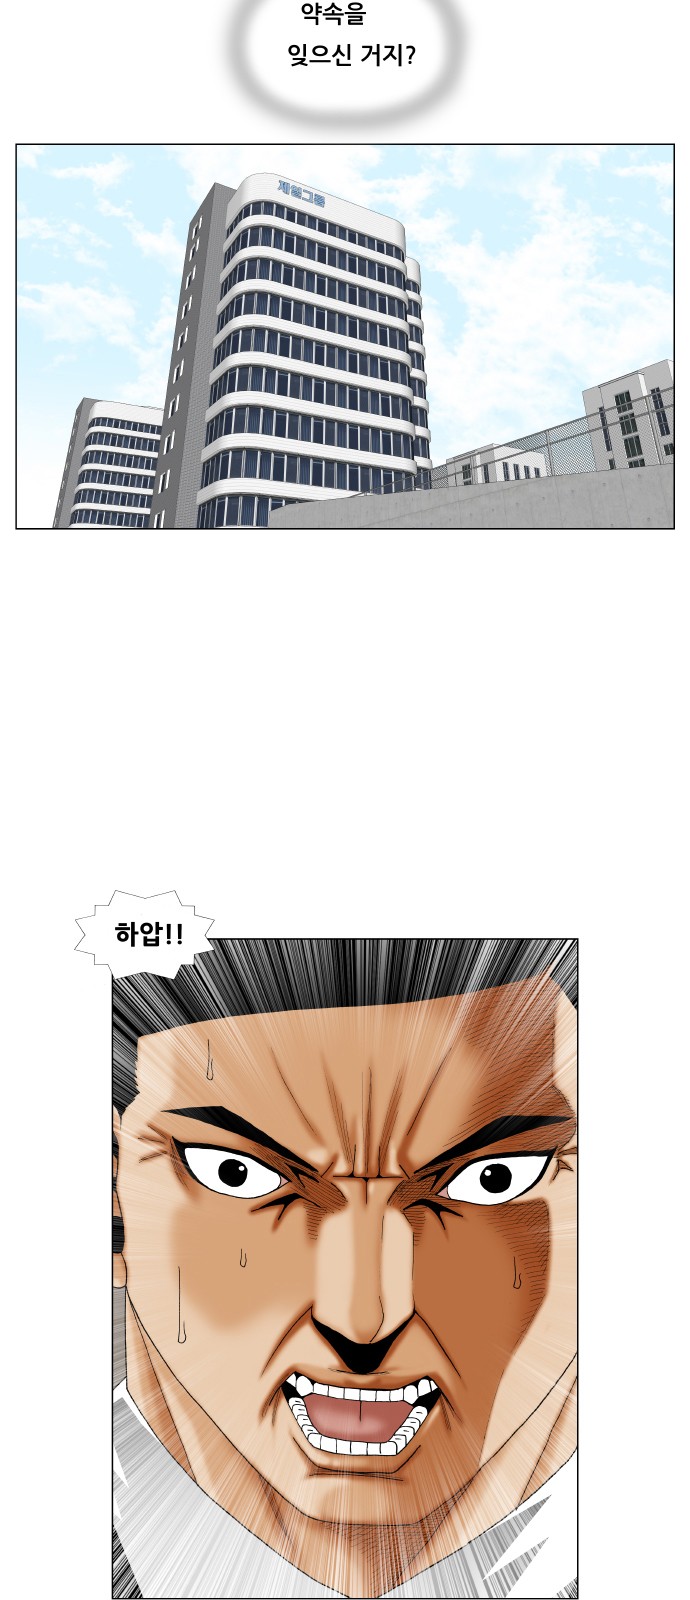 Ultimate Legend - Kang Hae Hyo - Chapter 266 - Page 2